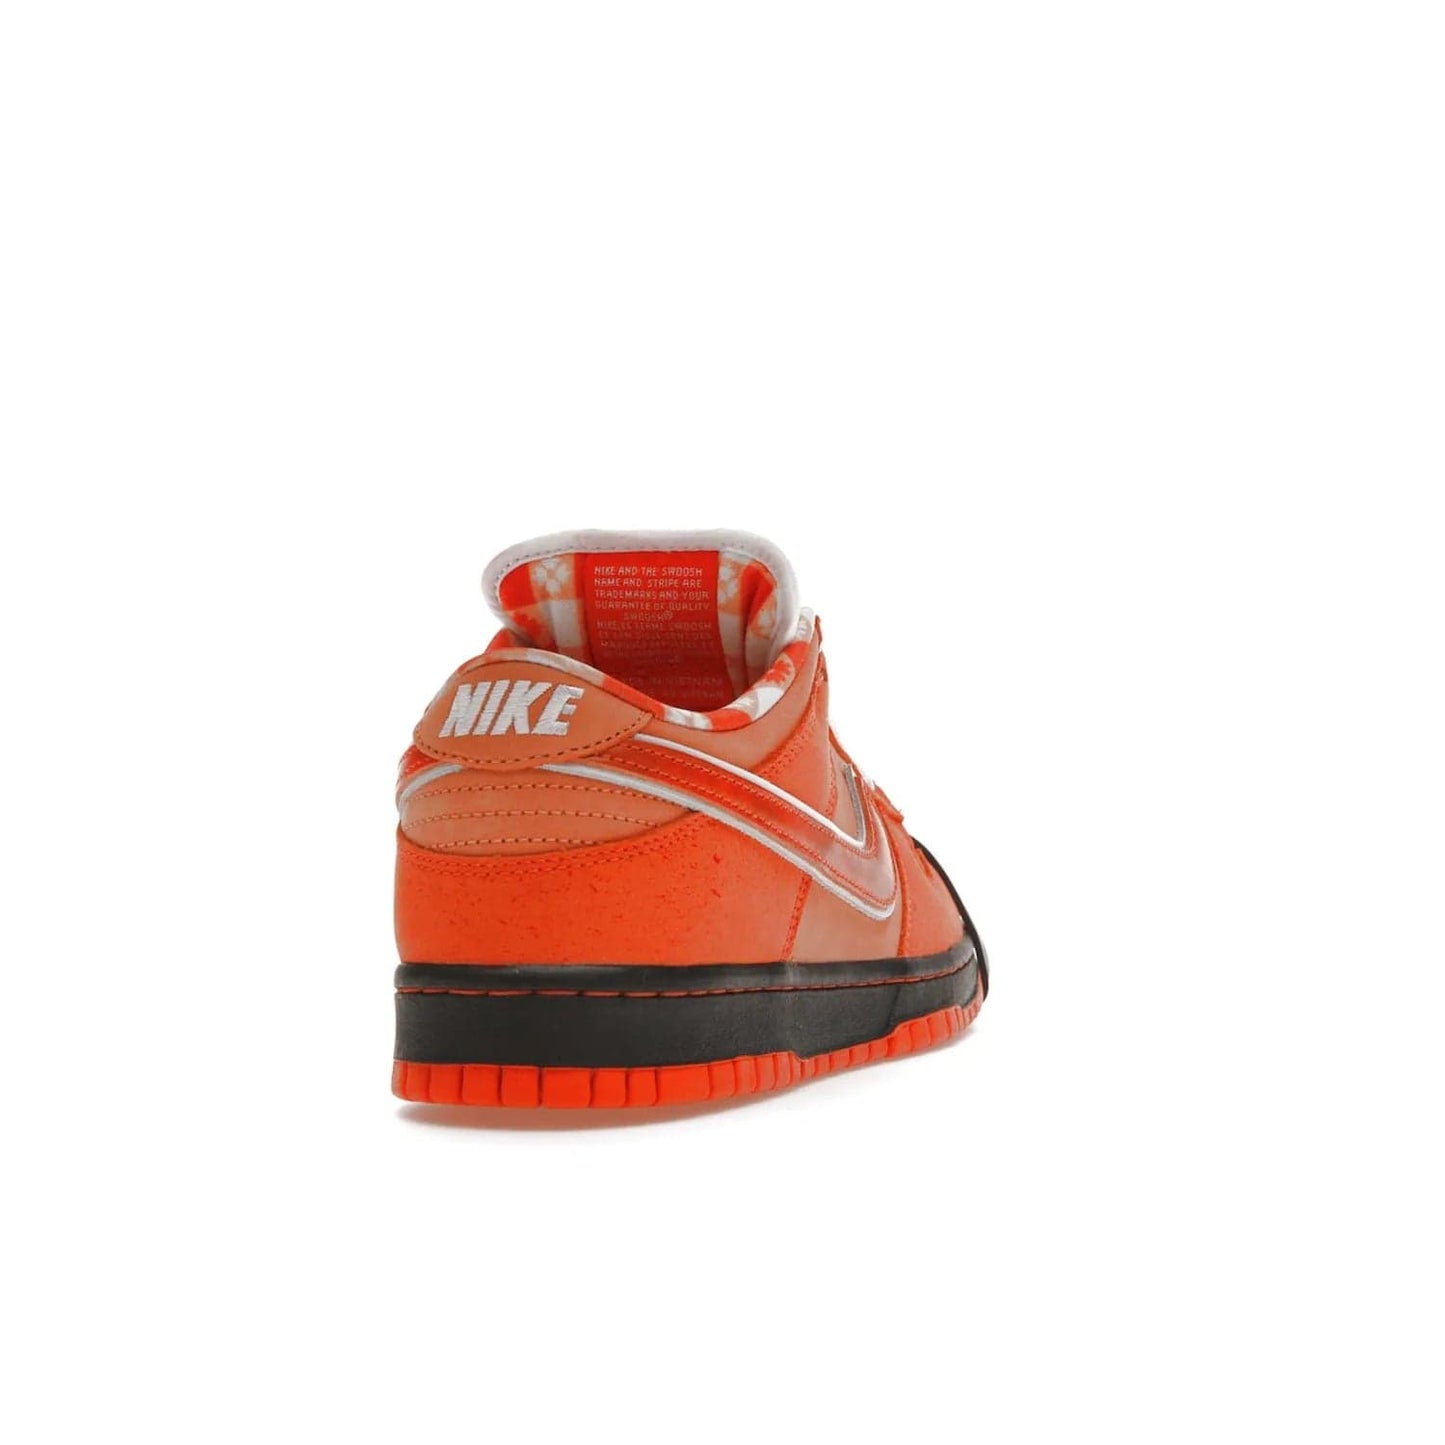 Nike SB Dunk Low Concepts Orange Lobster - Image 30 - Only at www.BallersClubKickz.com - Make a statement with the Nike SB Dunk Low Concepts Orange Lobster. Variety of orange hues, nubuck upper, bib-inspired lining & rubber outsole create bold look & comfortable blend of style. Available December 20th, 2022.